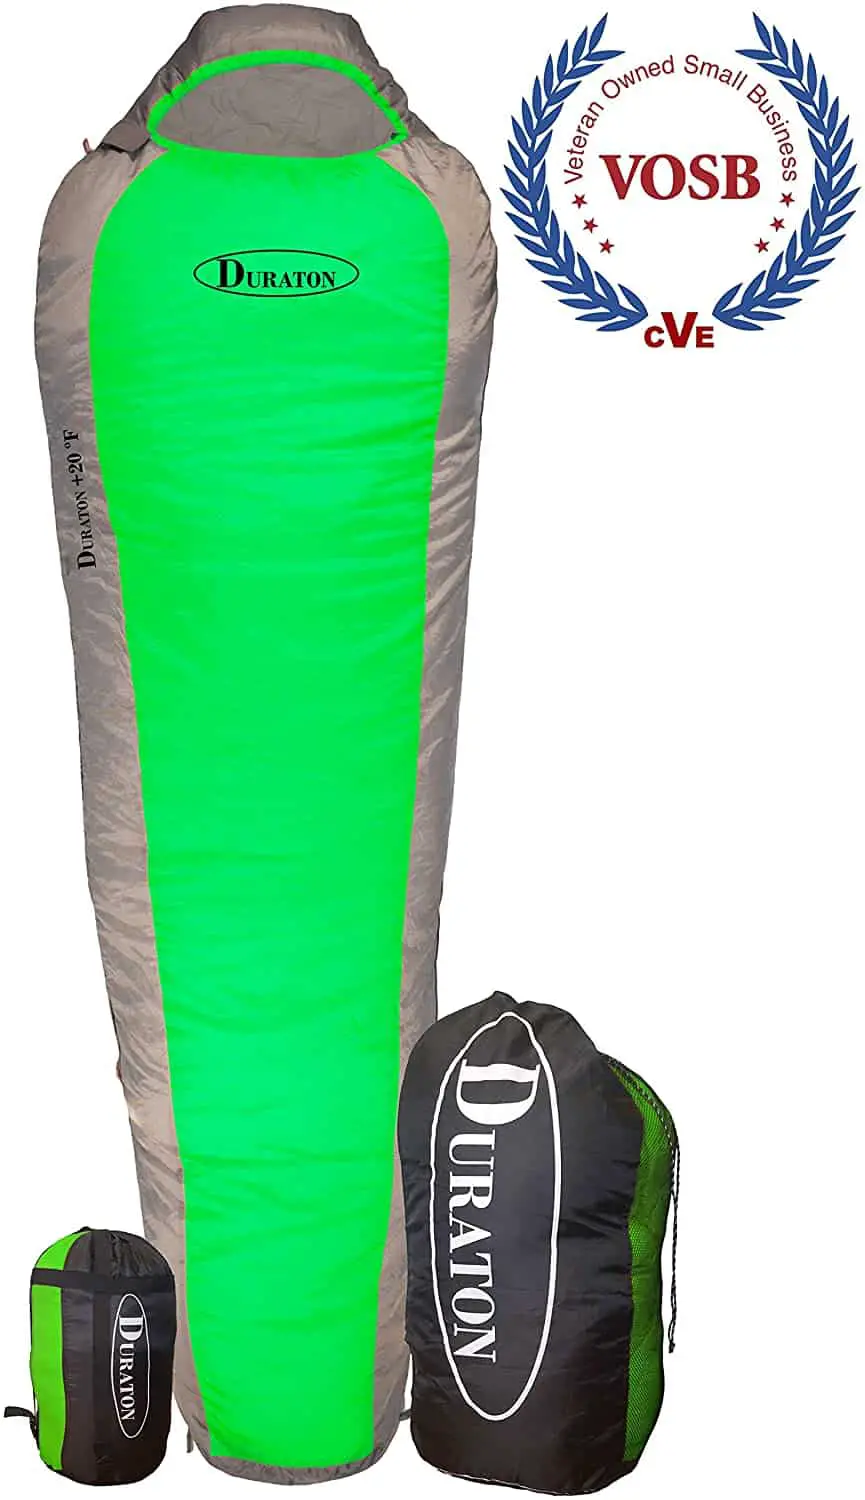 Duraton Mummy Sleeping Bag 20 Degree Weather, Lightweight with Compression Sack for Camping or Backpacking, Warm for Both Adults and Kids